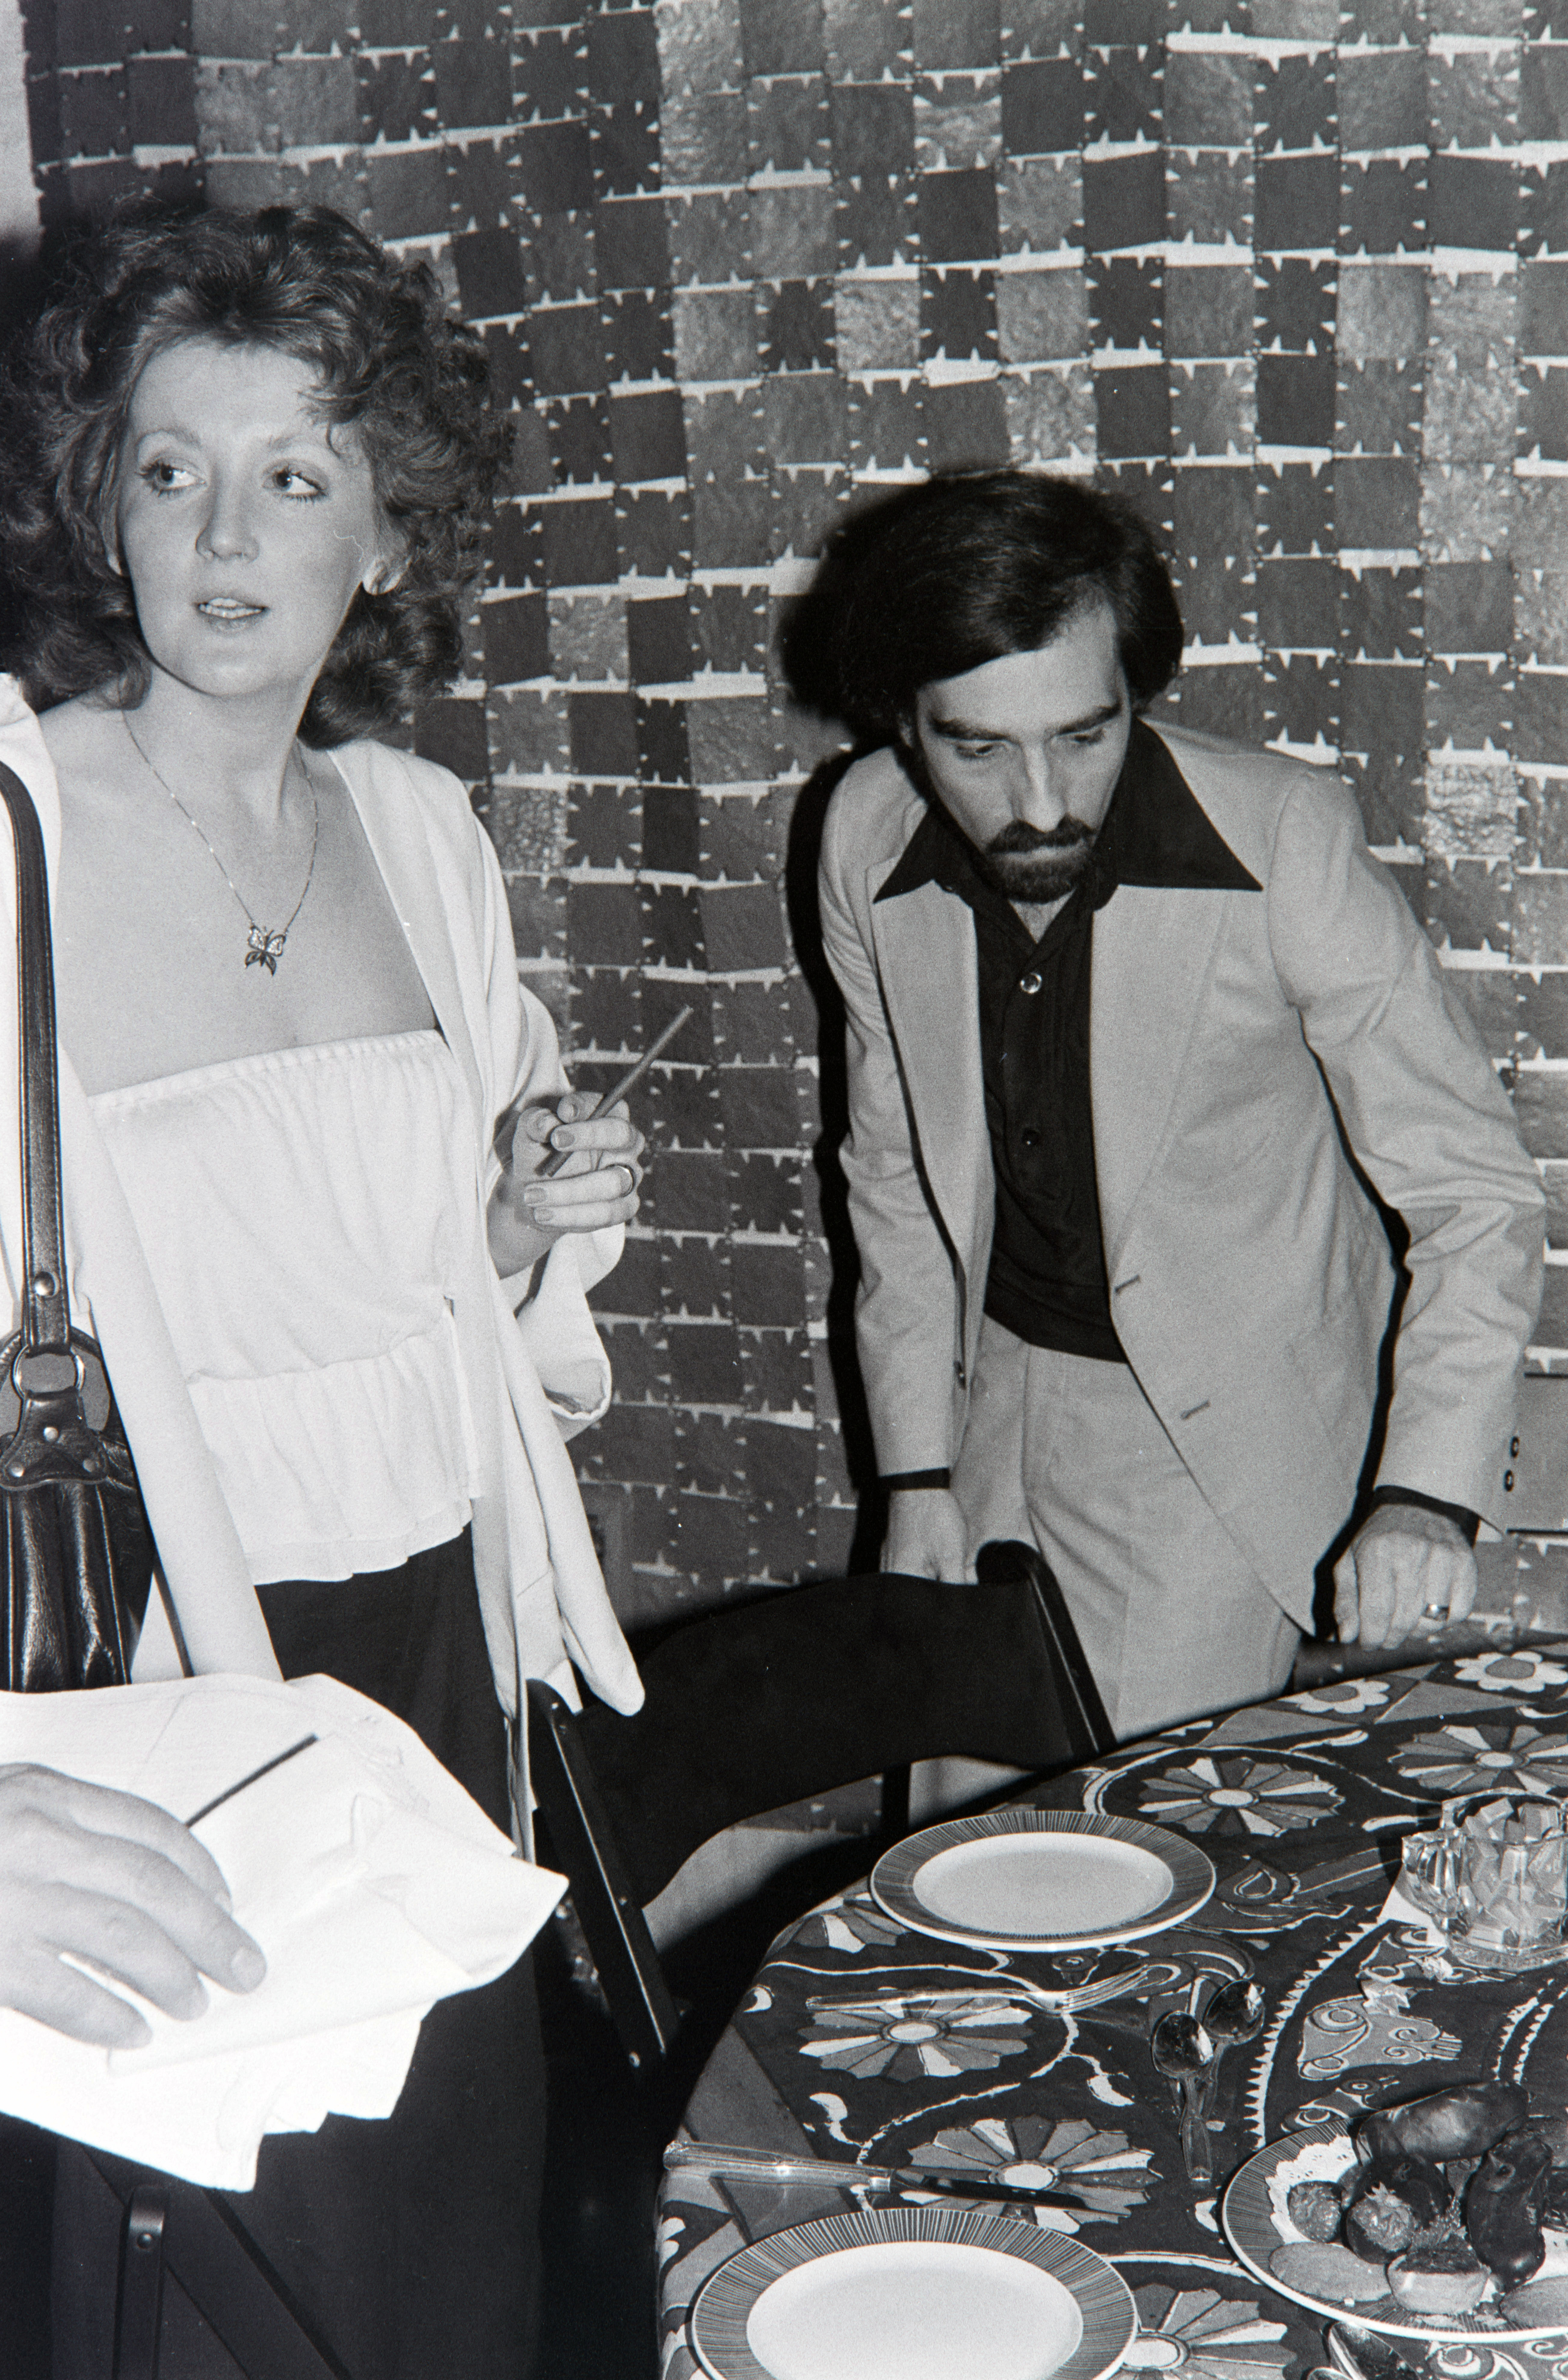 Julia Cameron and Martin Scorsese attend a party at Tony Duquette’s studio in Hollywood, California, on April 4, 1977